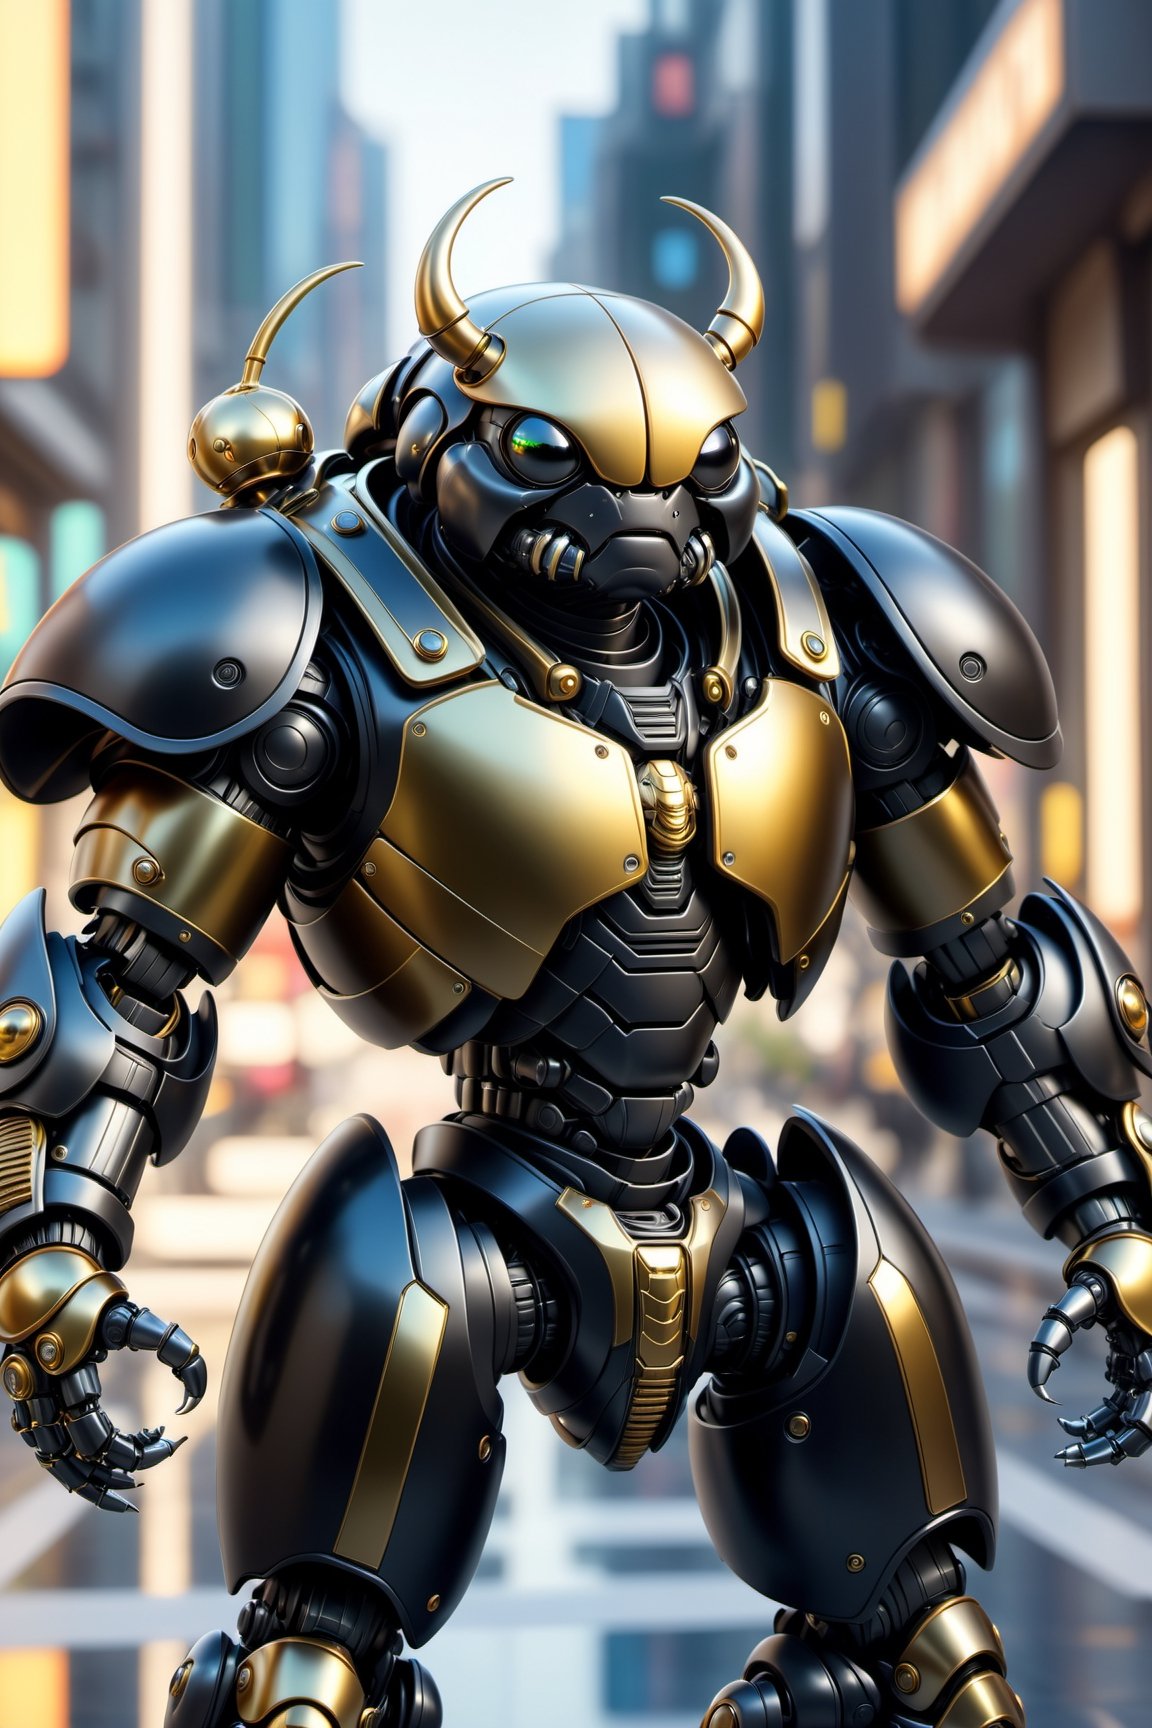 Angry AgileDung Beetle mecha robo soldier character,black armor, anthropomorphic figure, wearing futuristic soldier armor and weapons, reflection mapping, realistic figure, hyperdetailed, cinematic lighting photography, 32k uhd with a golden staff, roaring

By: panchovilla,mecha